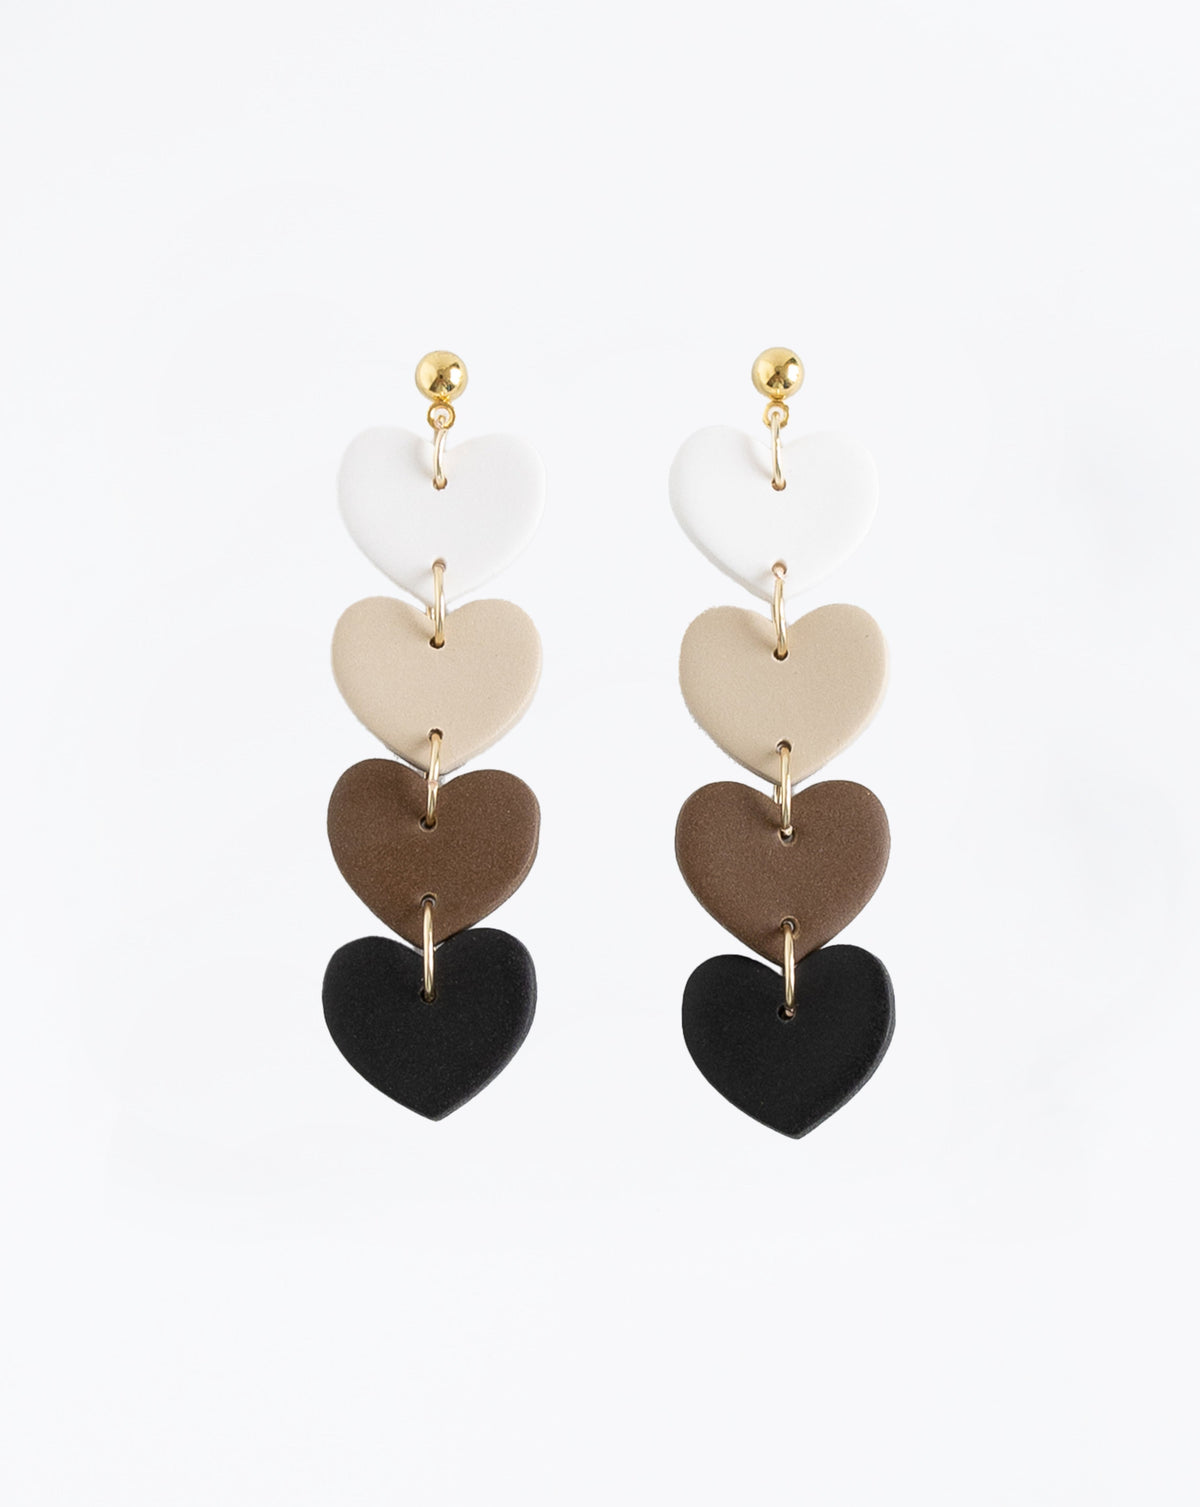 Handmade Heart Chain Earrings from LYHO Studio, 6.5 cm, Polymer Clay, Artisan Crafted in the Netherlands